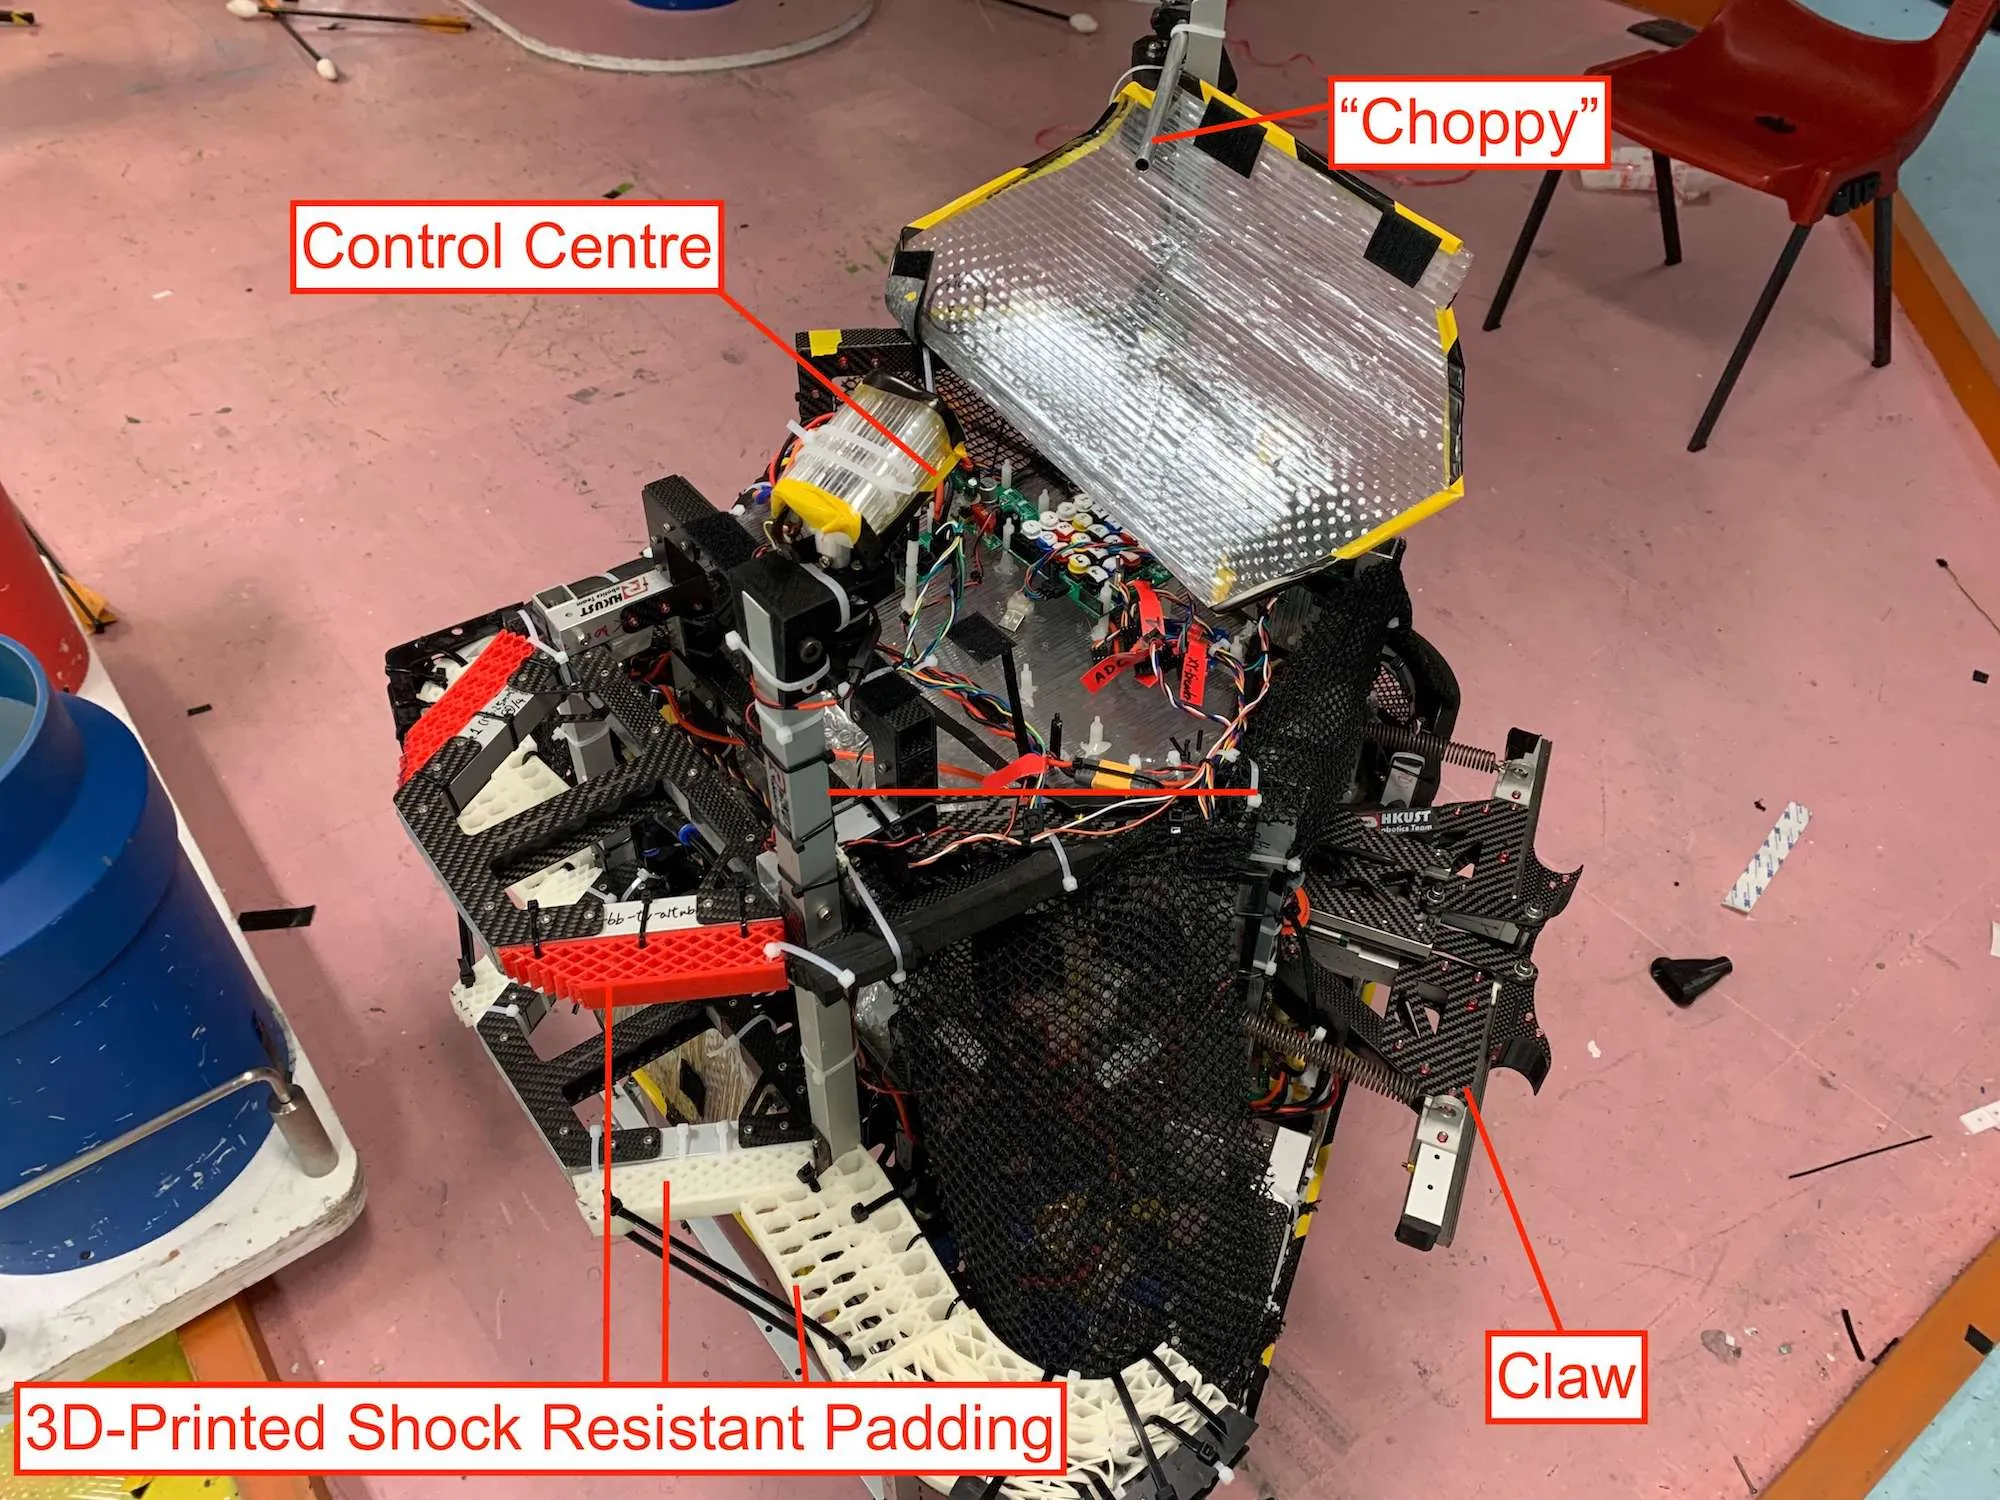 Annotated photo of HKUST Fiery Dragon's Robocon 2021 Defence Robot